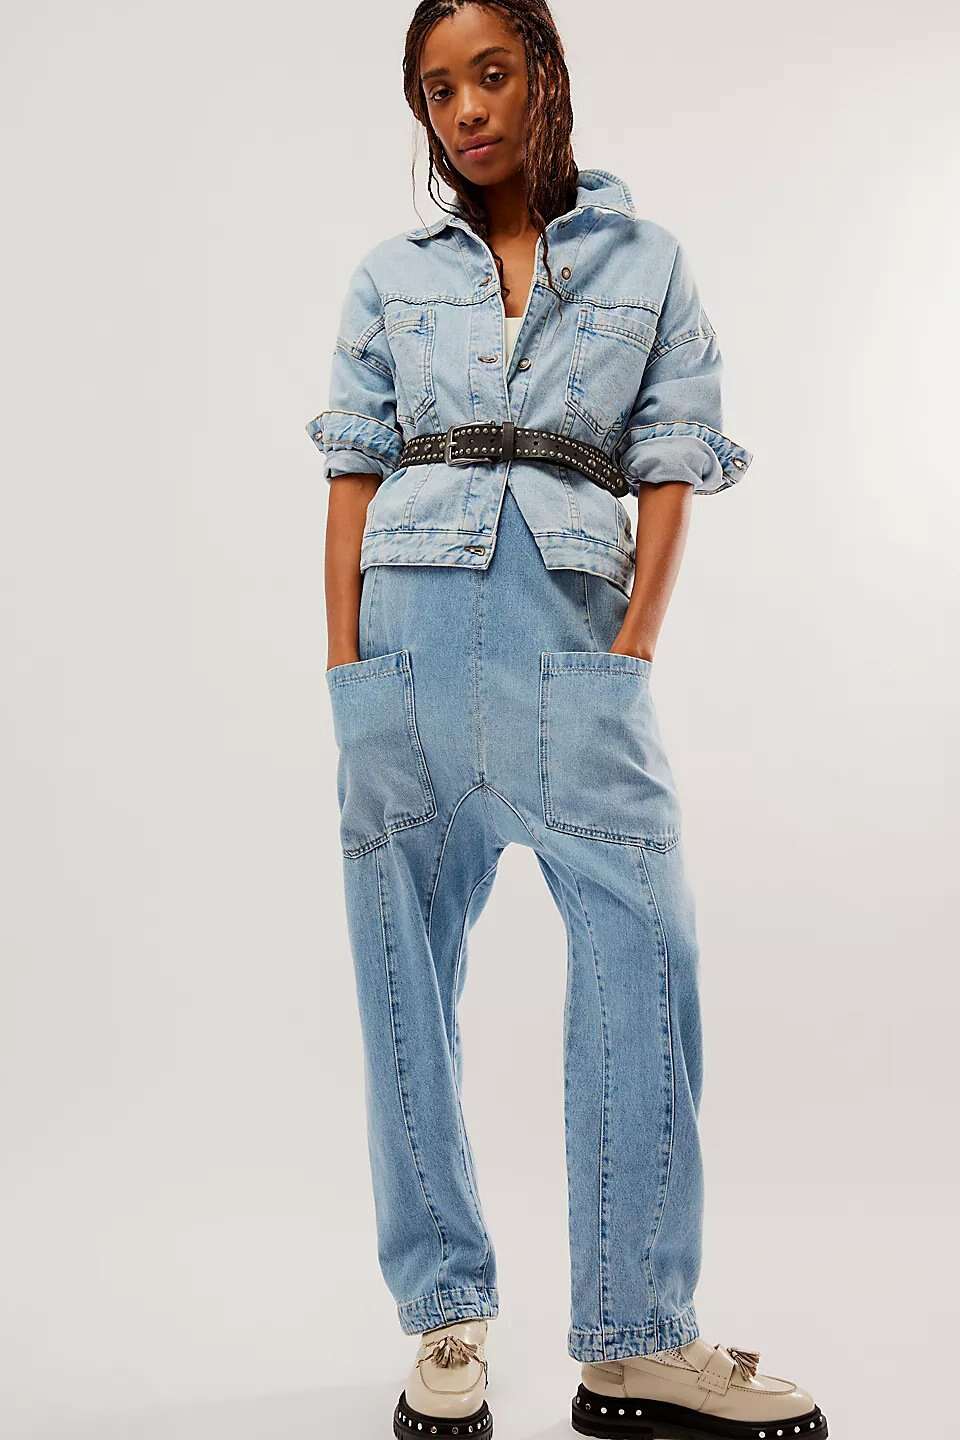 New arrival-Denim Jumpsuit With Pockets (Buy 2 Free Shipping)